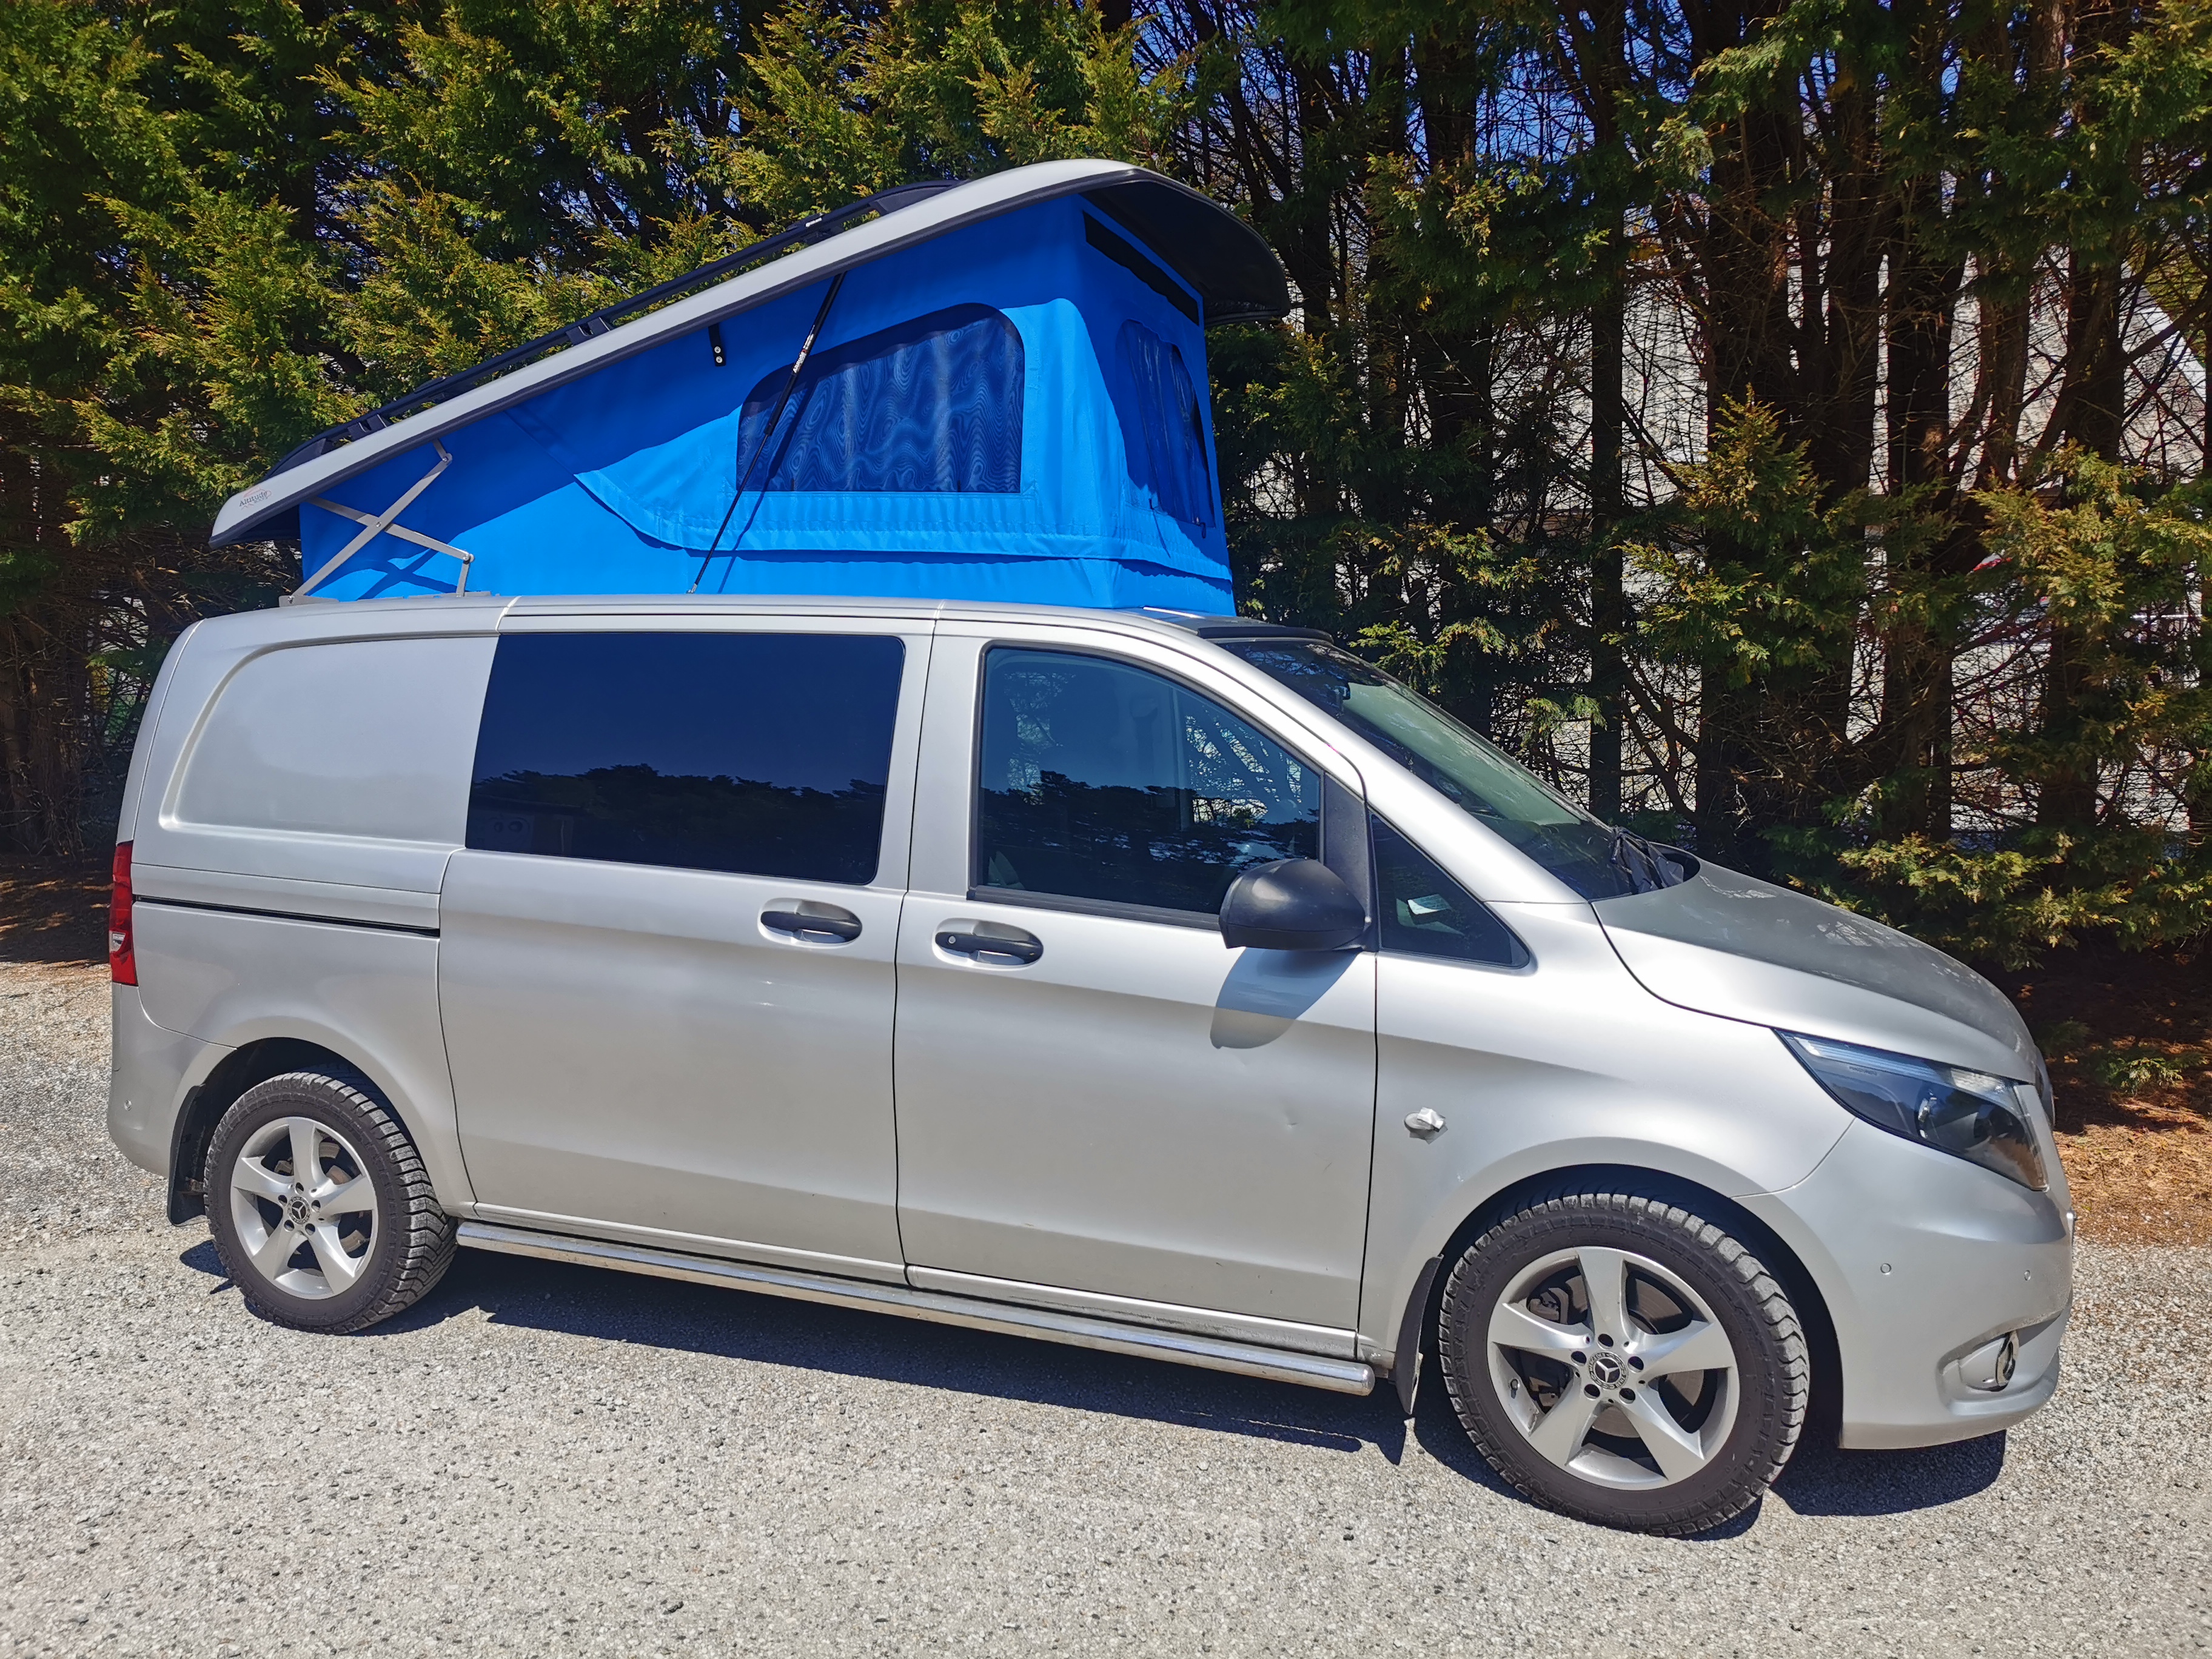 Mercedes Vito W447 elevating roof